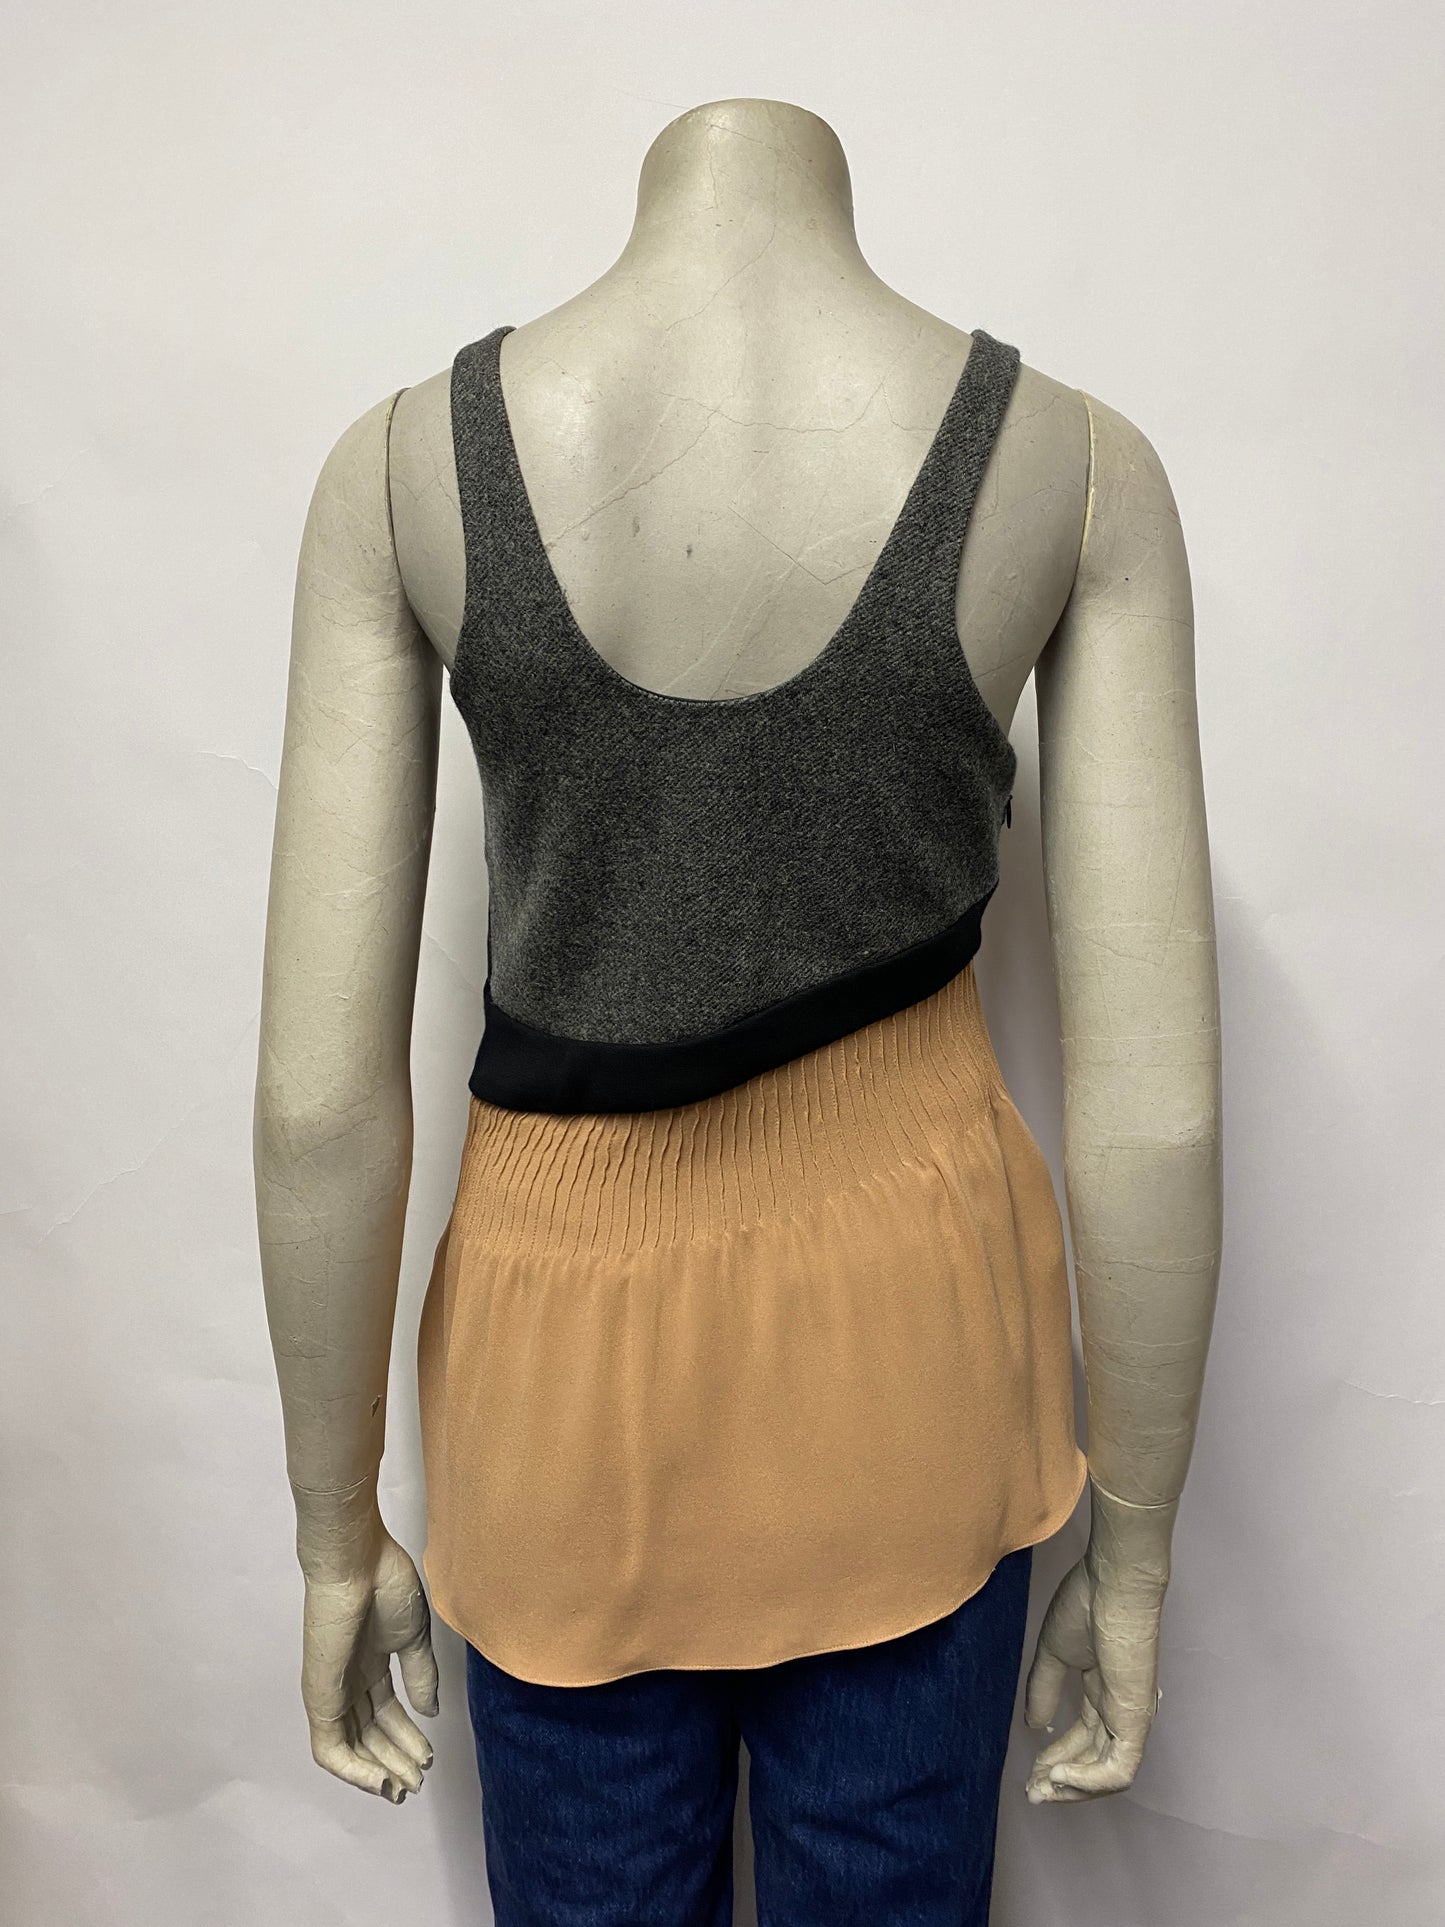 Marni Grey and Black Panelled Asymetric Vest 6